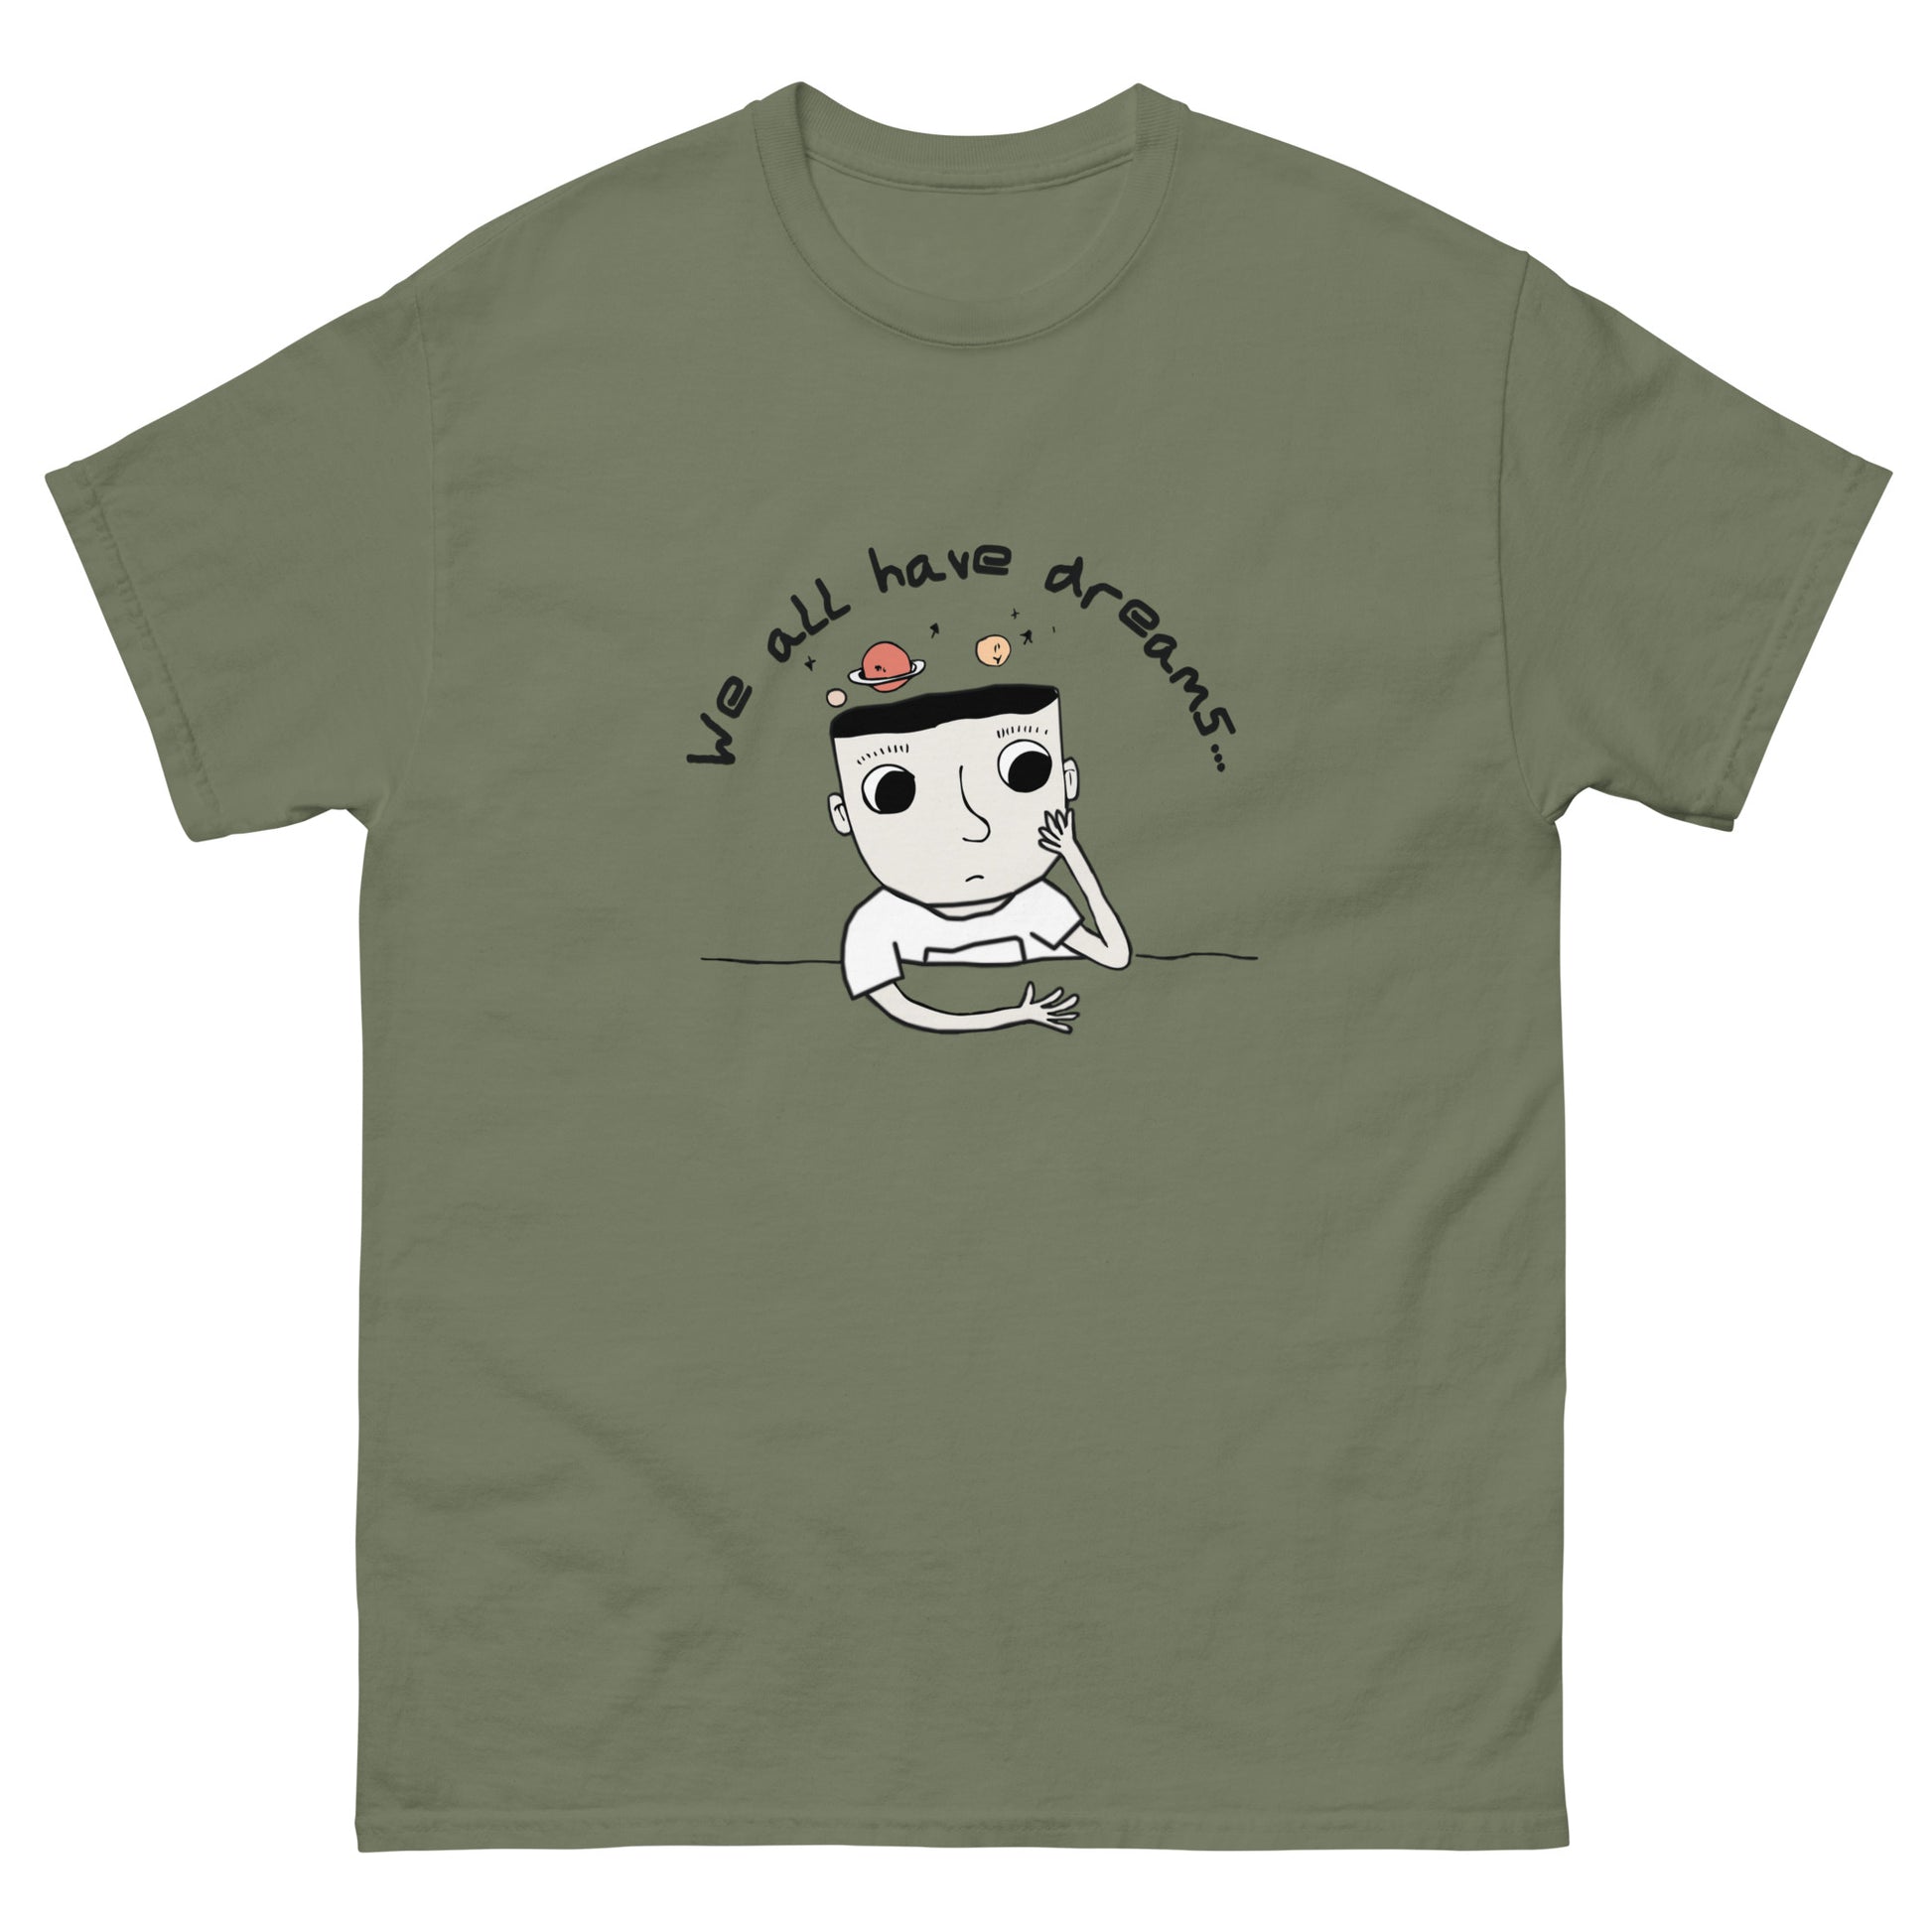 military green color cotton t shirt with dream boy